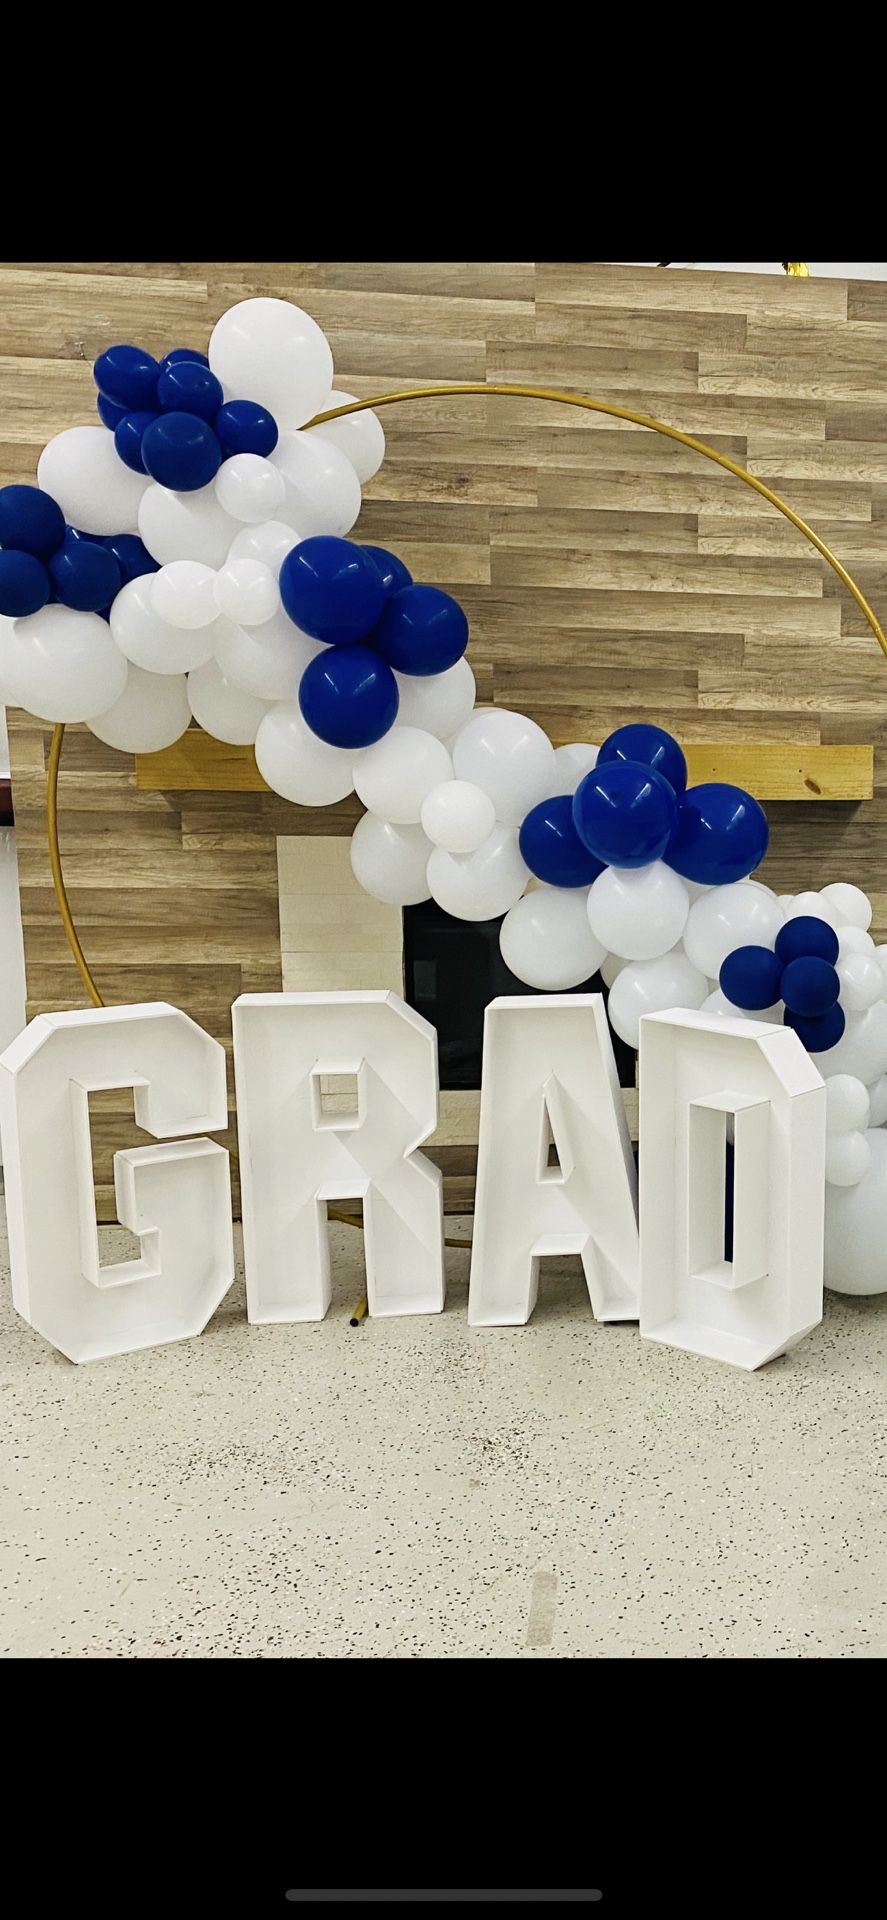 Marquee GRAD letters